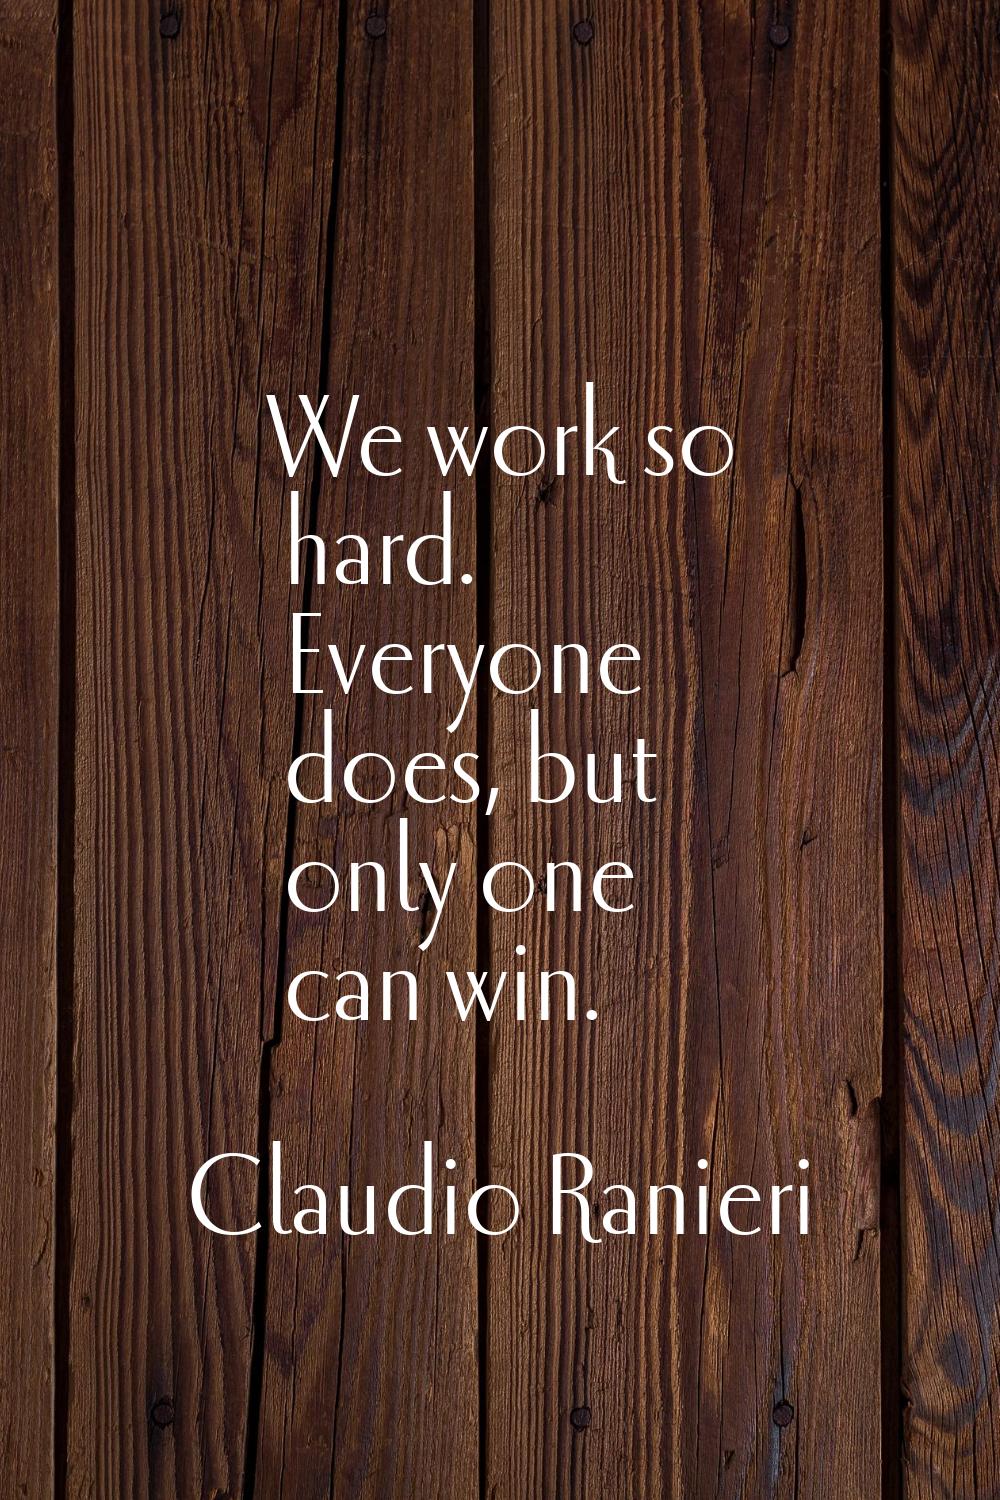 We work so hard. Everyone does, but only one can win.